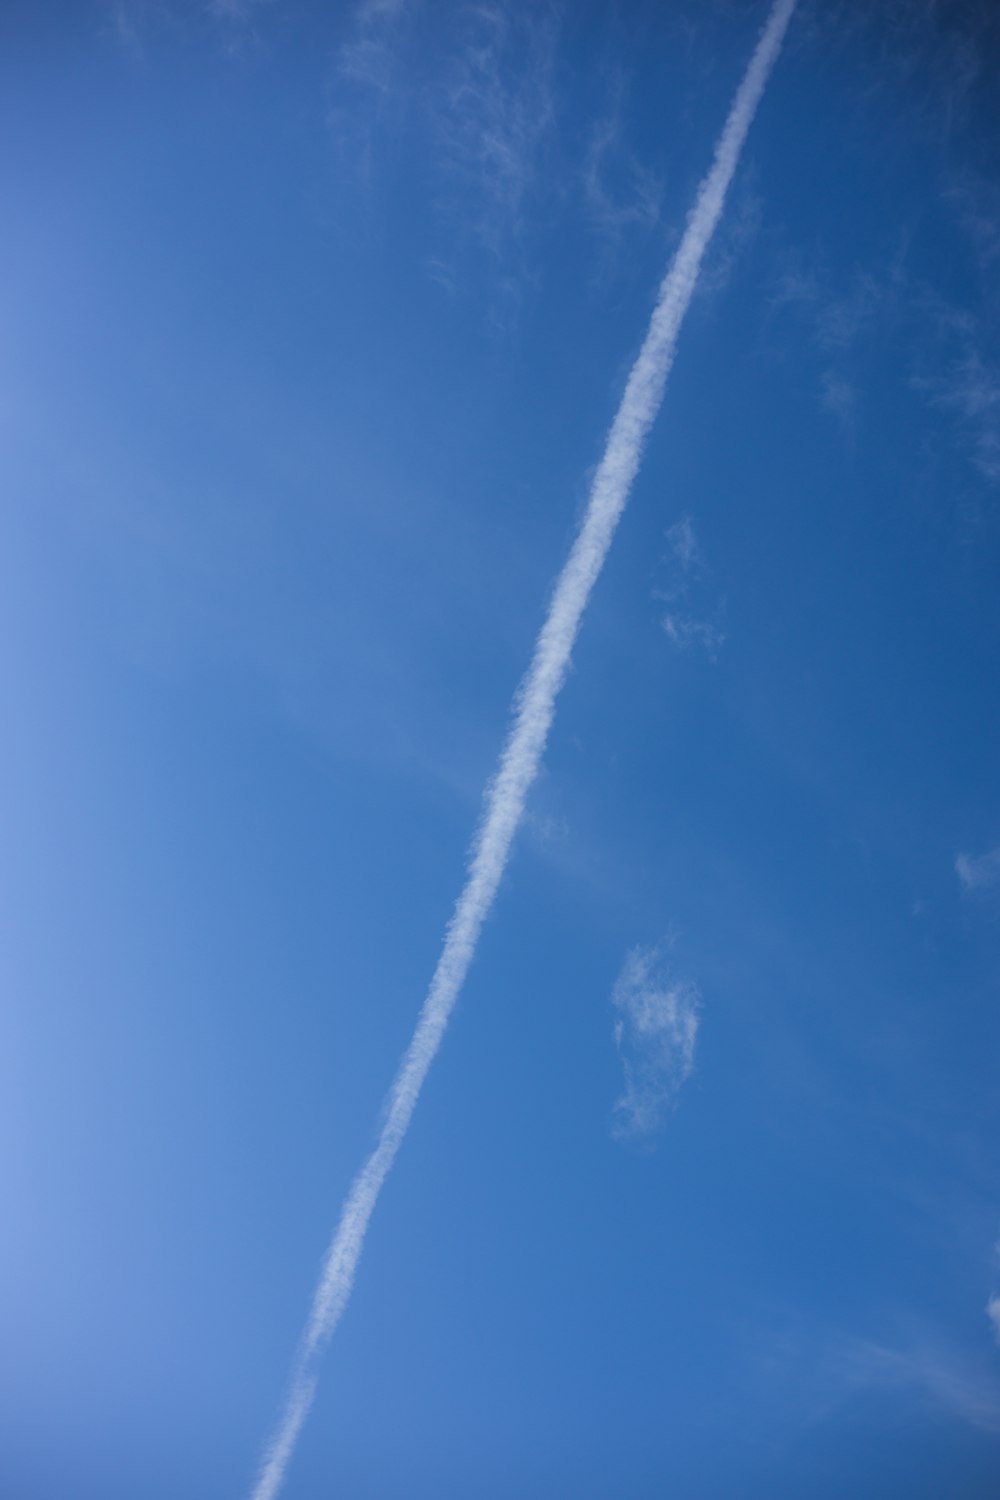 a plane flying in the sky with a contrail in the sky